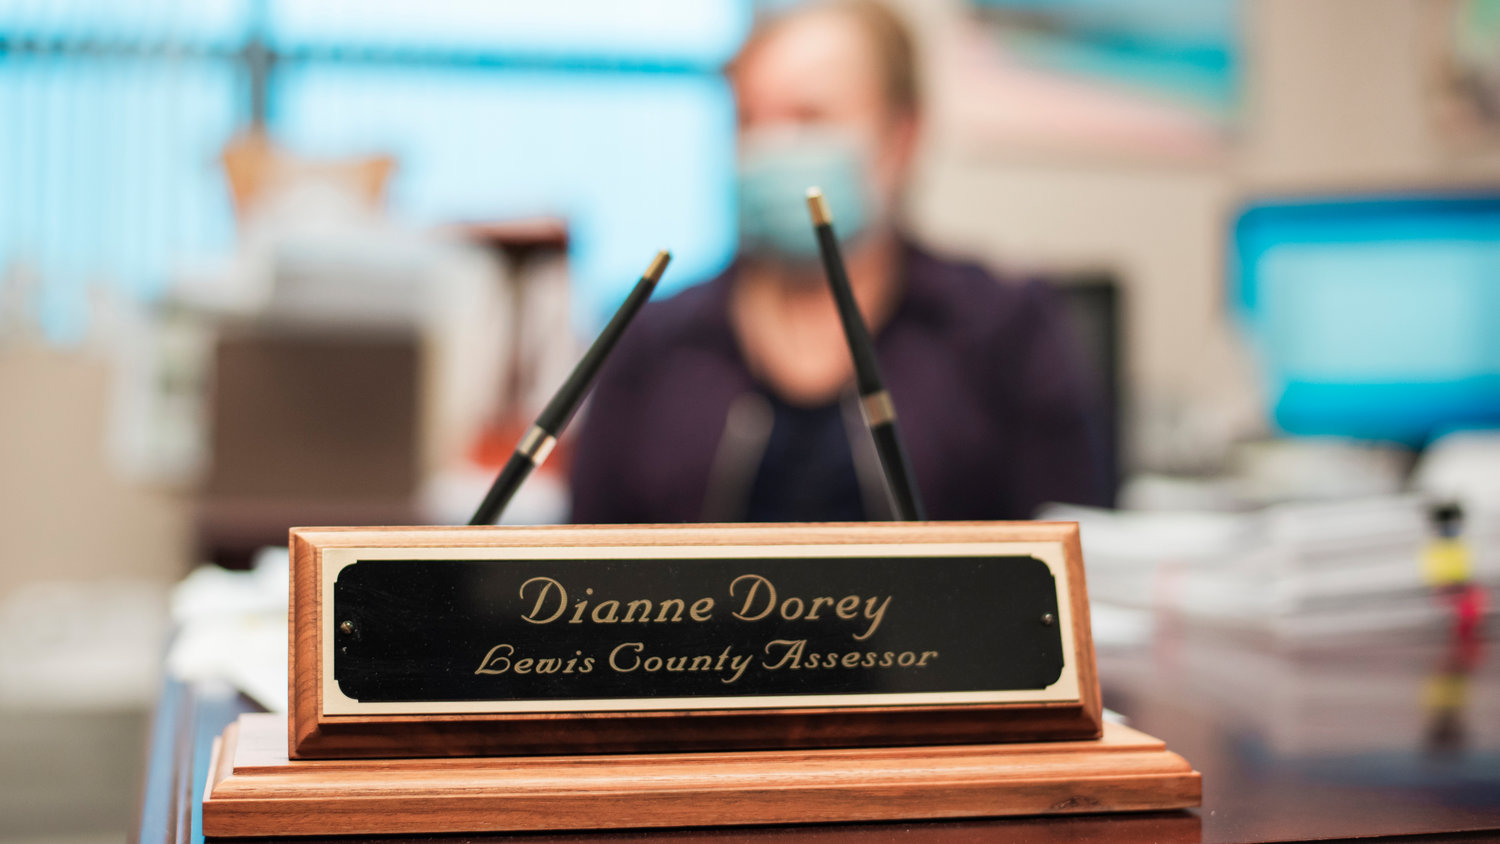 A name plaque reads "Dianne Dorey Lewis County Assessor" at the Lewis County Courthouse.